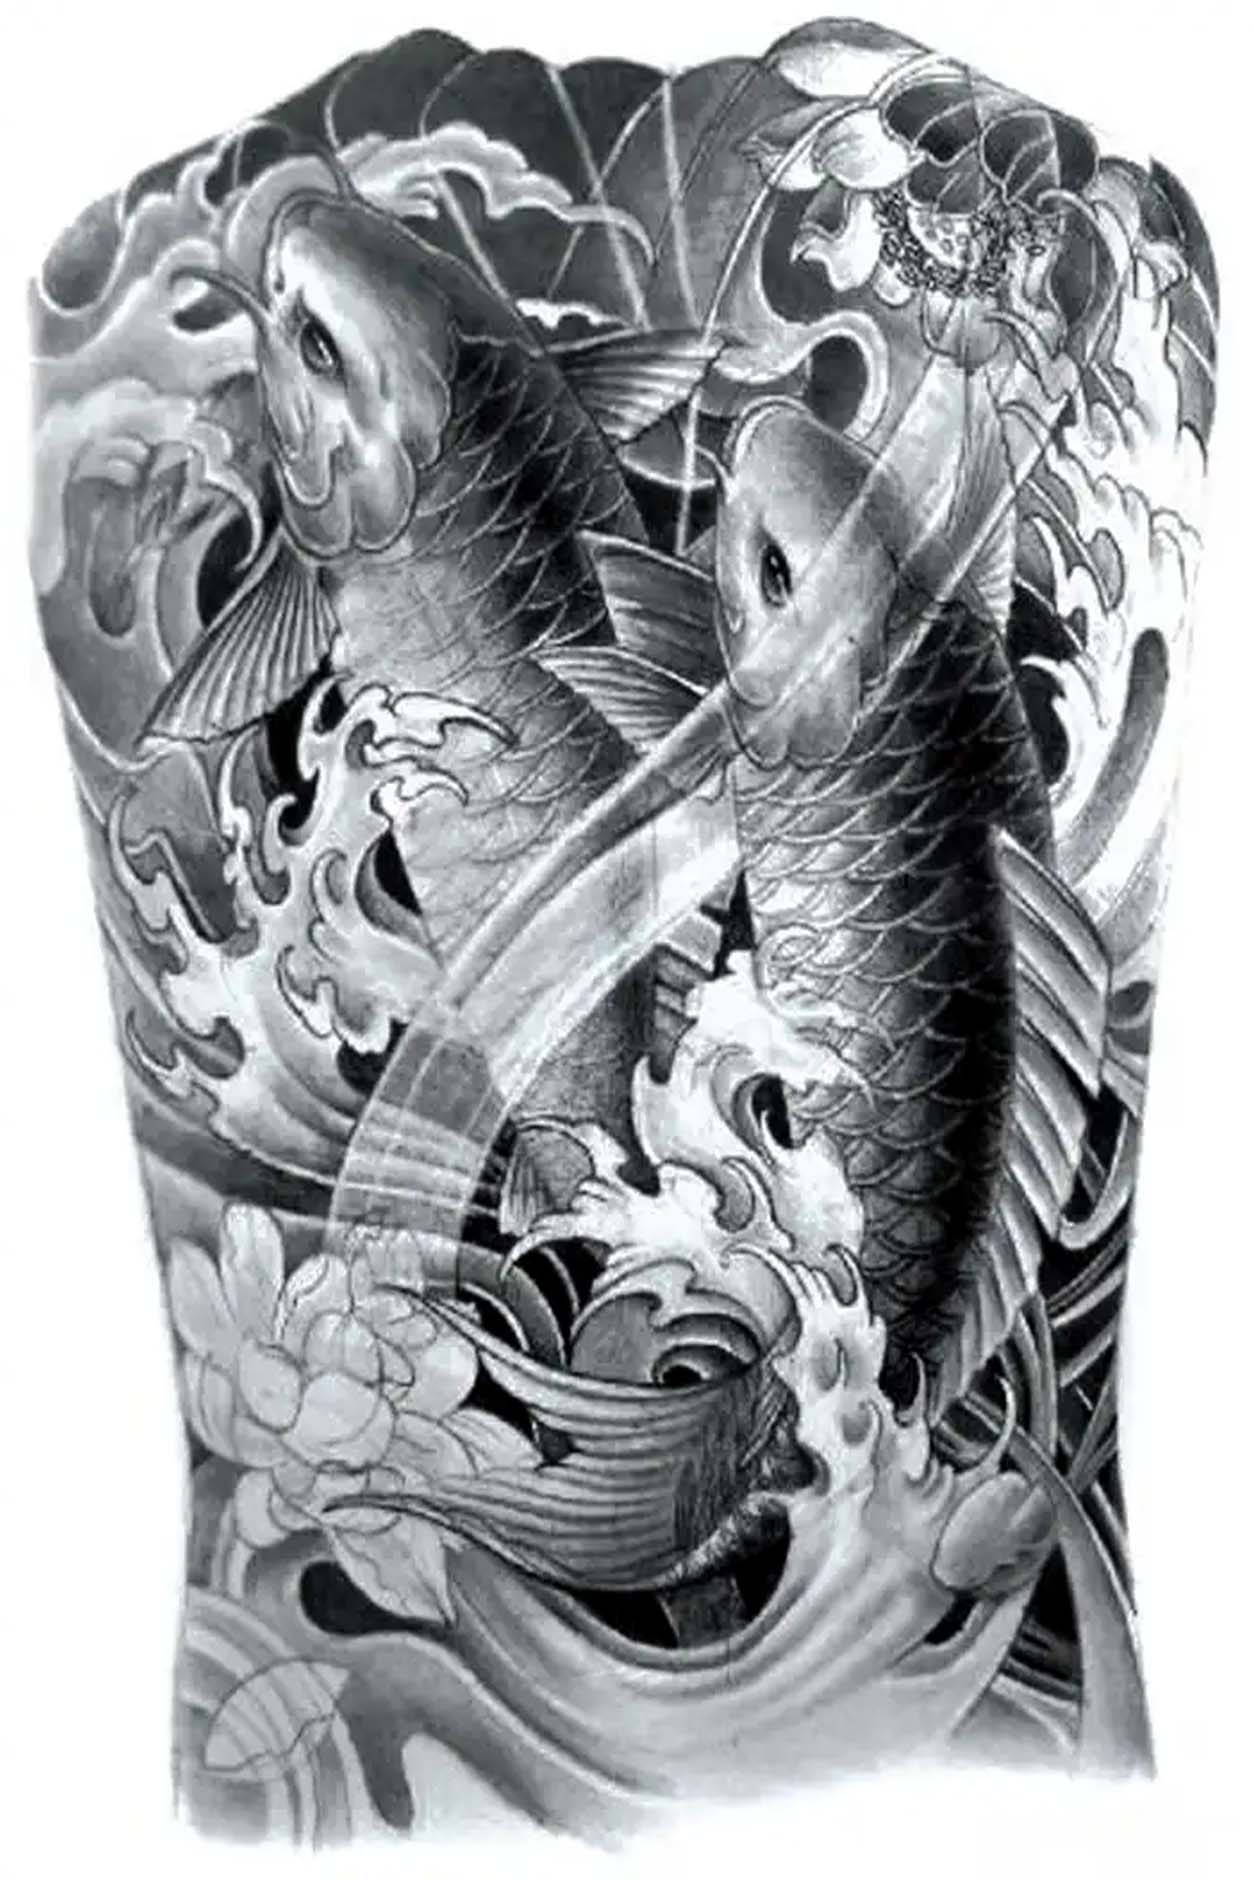 Two koi fish swims free in magical waves and lotus flowers. The color of the large back tattoo is aqua grey with lots of movement. Lotus, koi, and water establish their growth that comes out of challenging circumstances and further represent pain, struggle, and the rise to beauty.